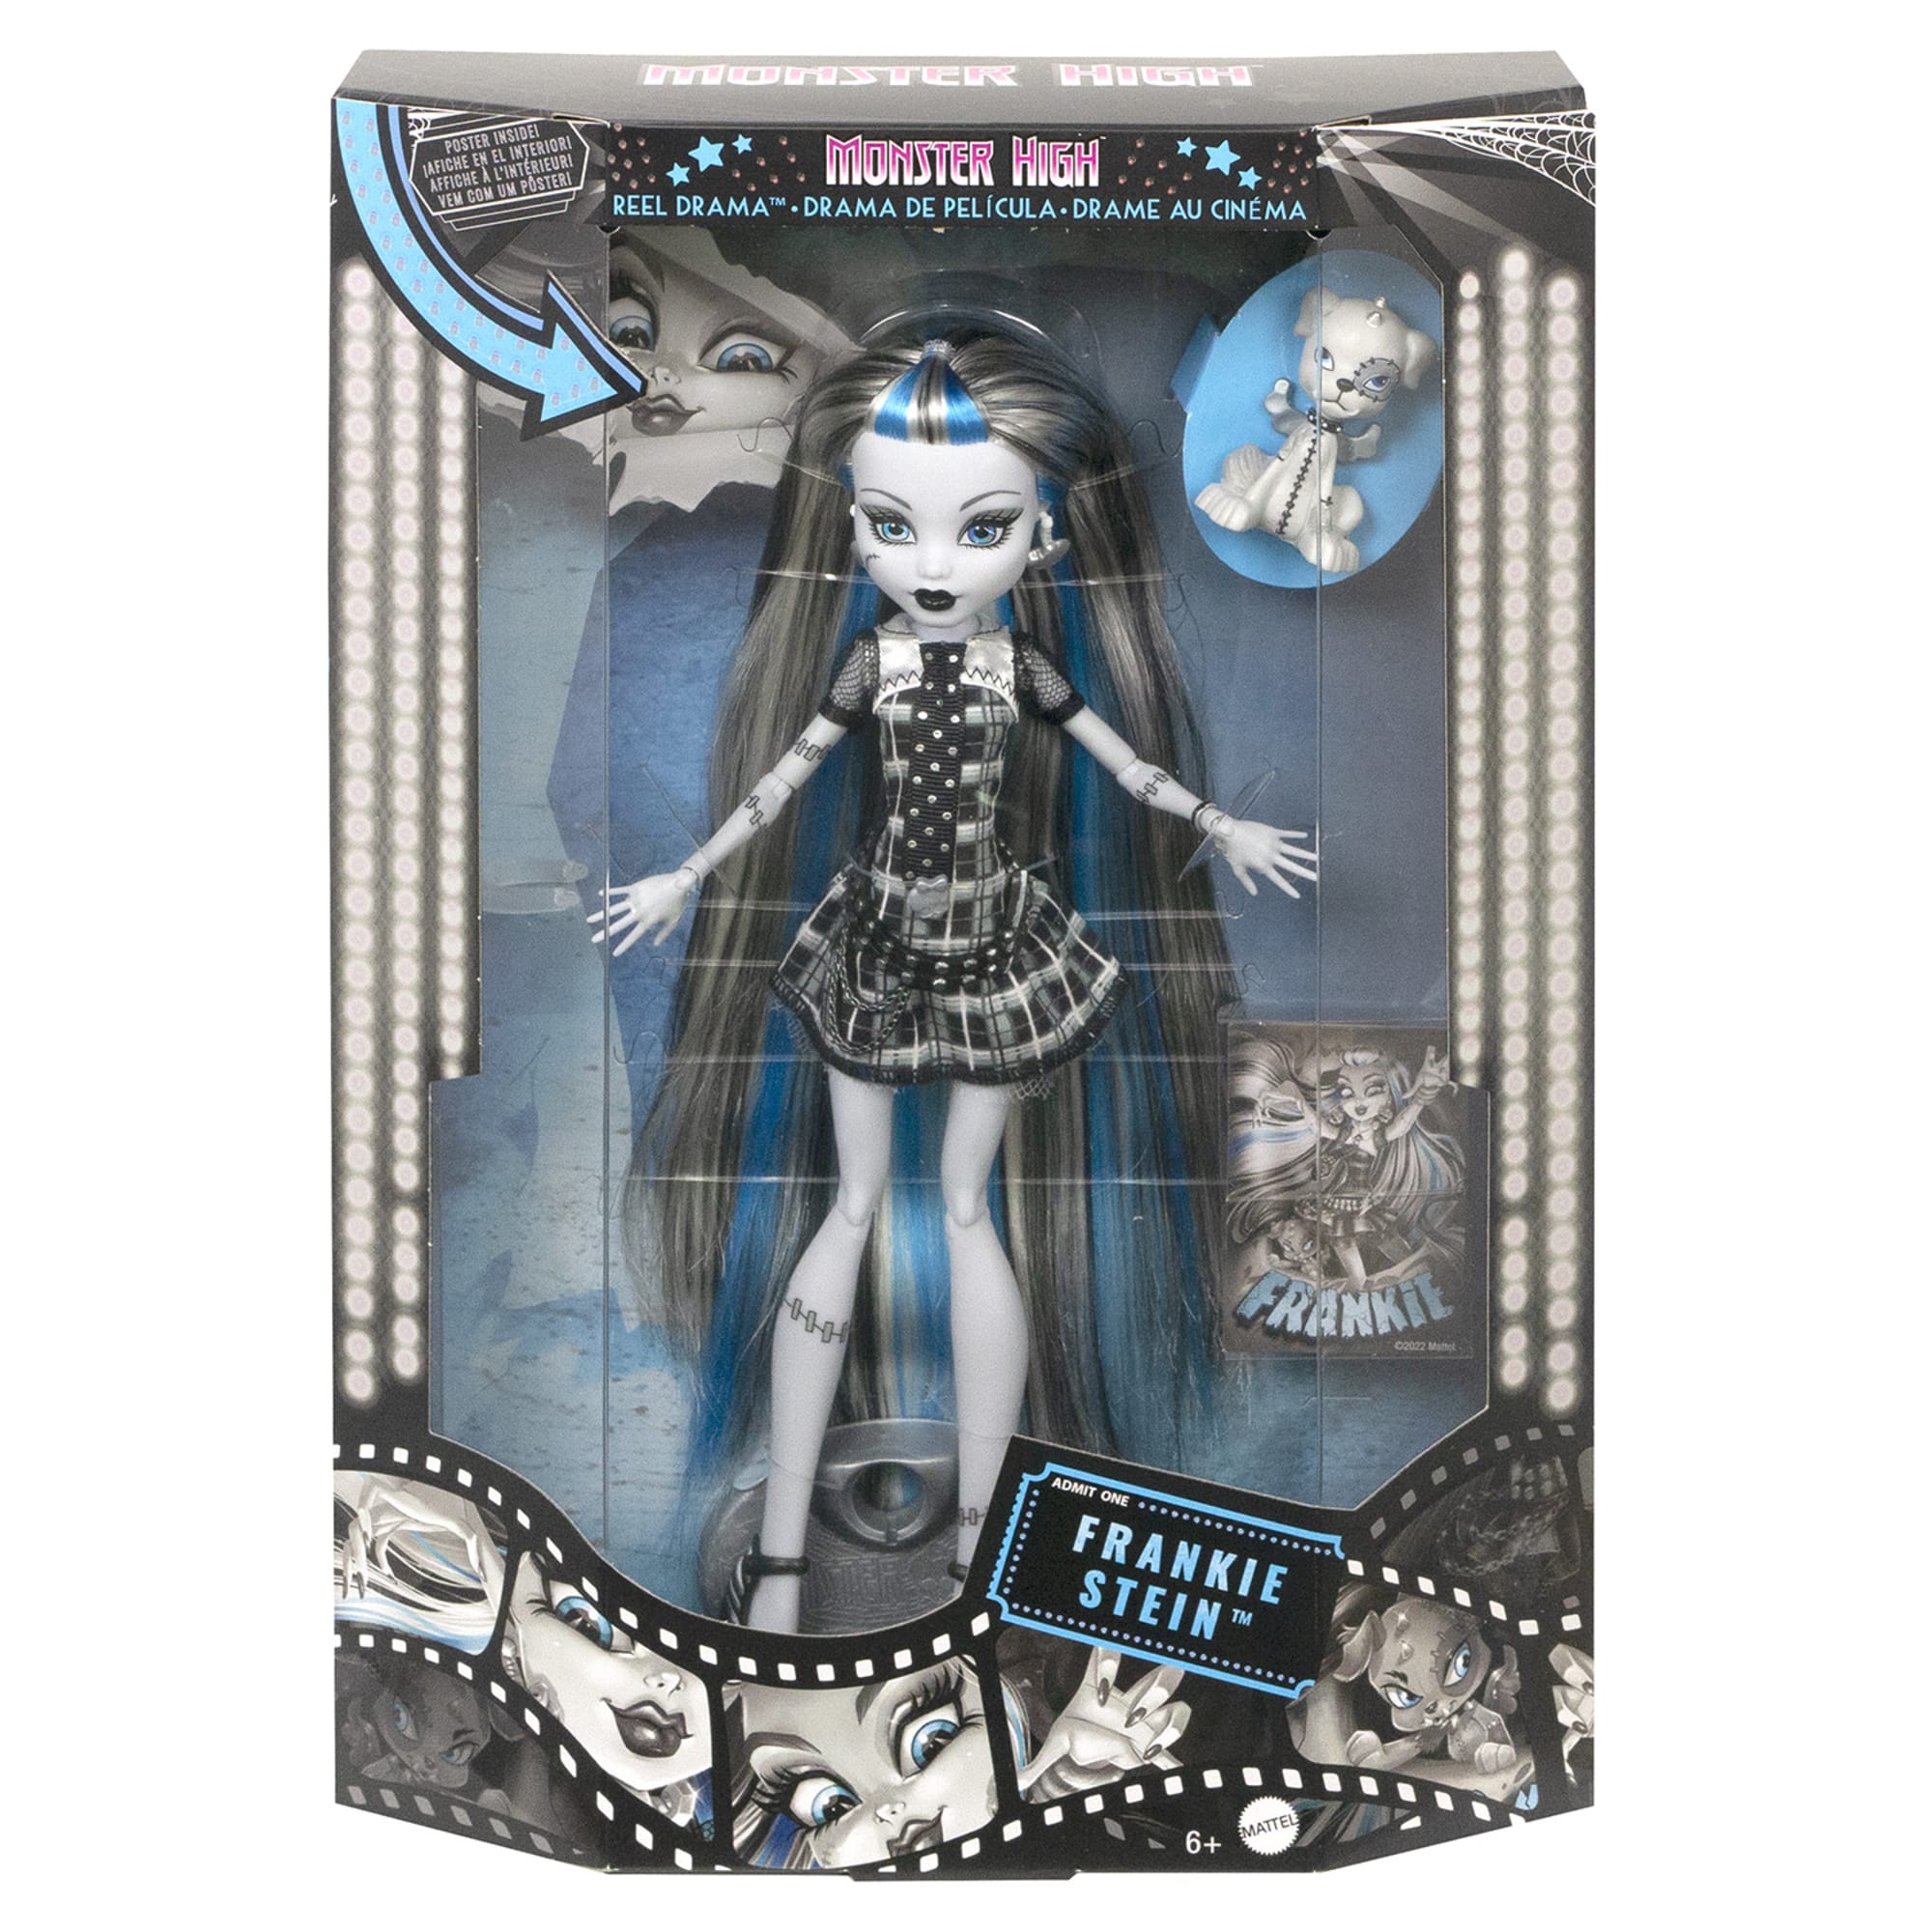 2022 Monster High Reel Drama Frankie Stein Collectors Doll - Brand New  Sealed, Fast Shipping